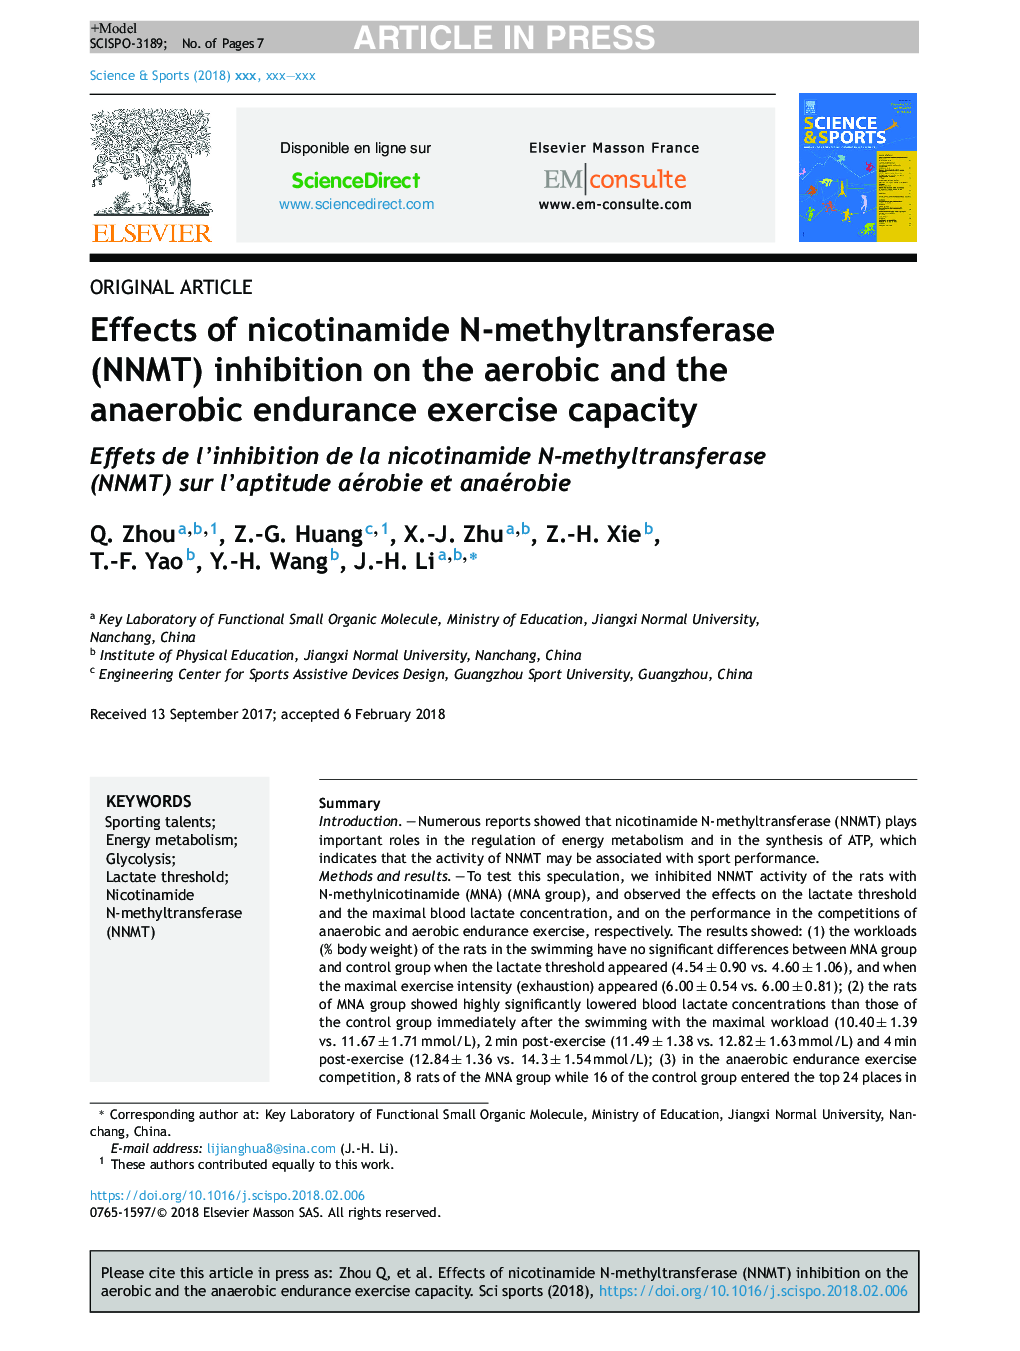 Effects of nicotinamide N-methyltransferase (NNMT) inhibition on the aerobic and the anaerobic endurance exercise capacity